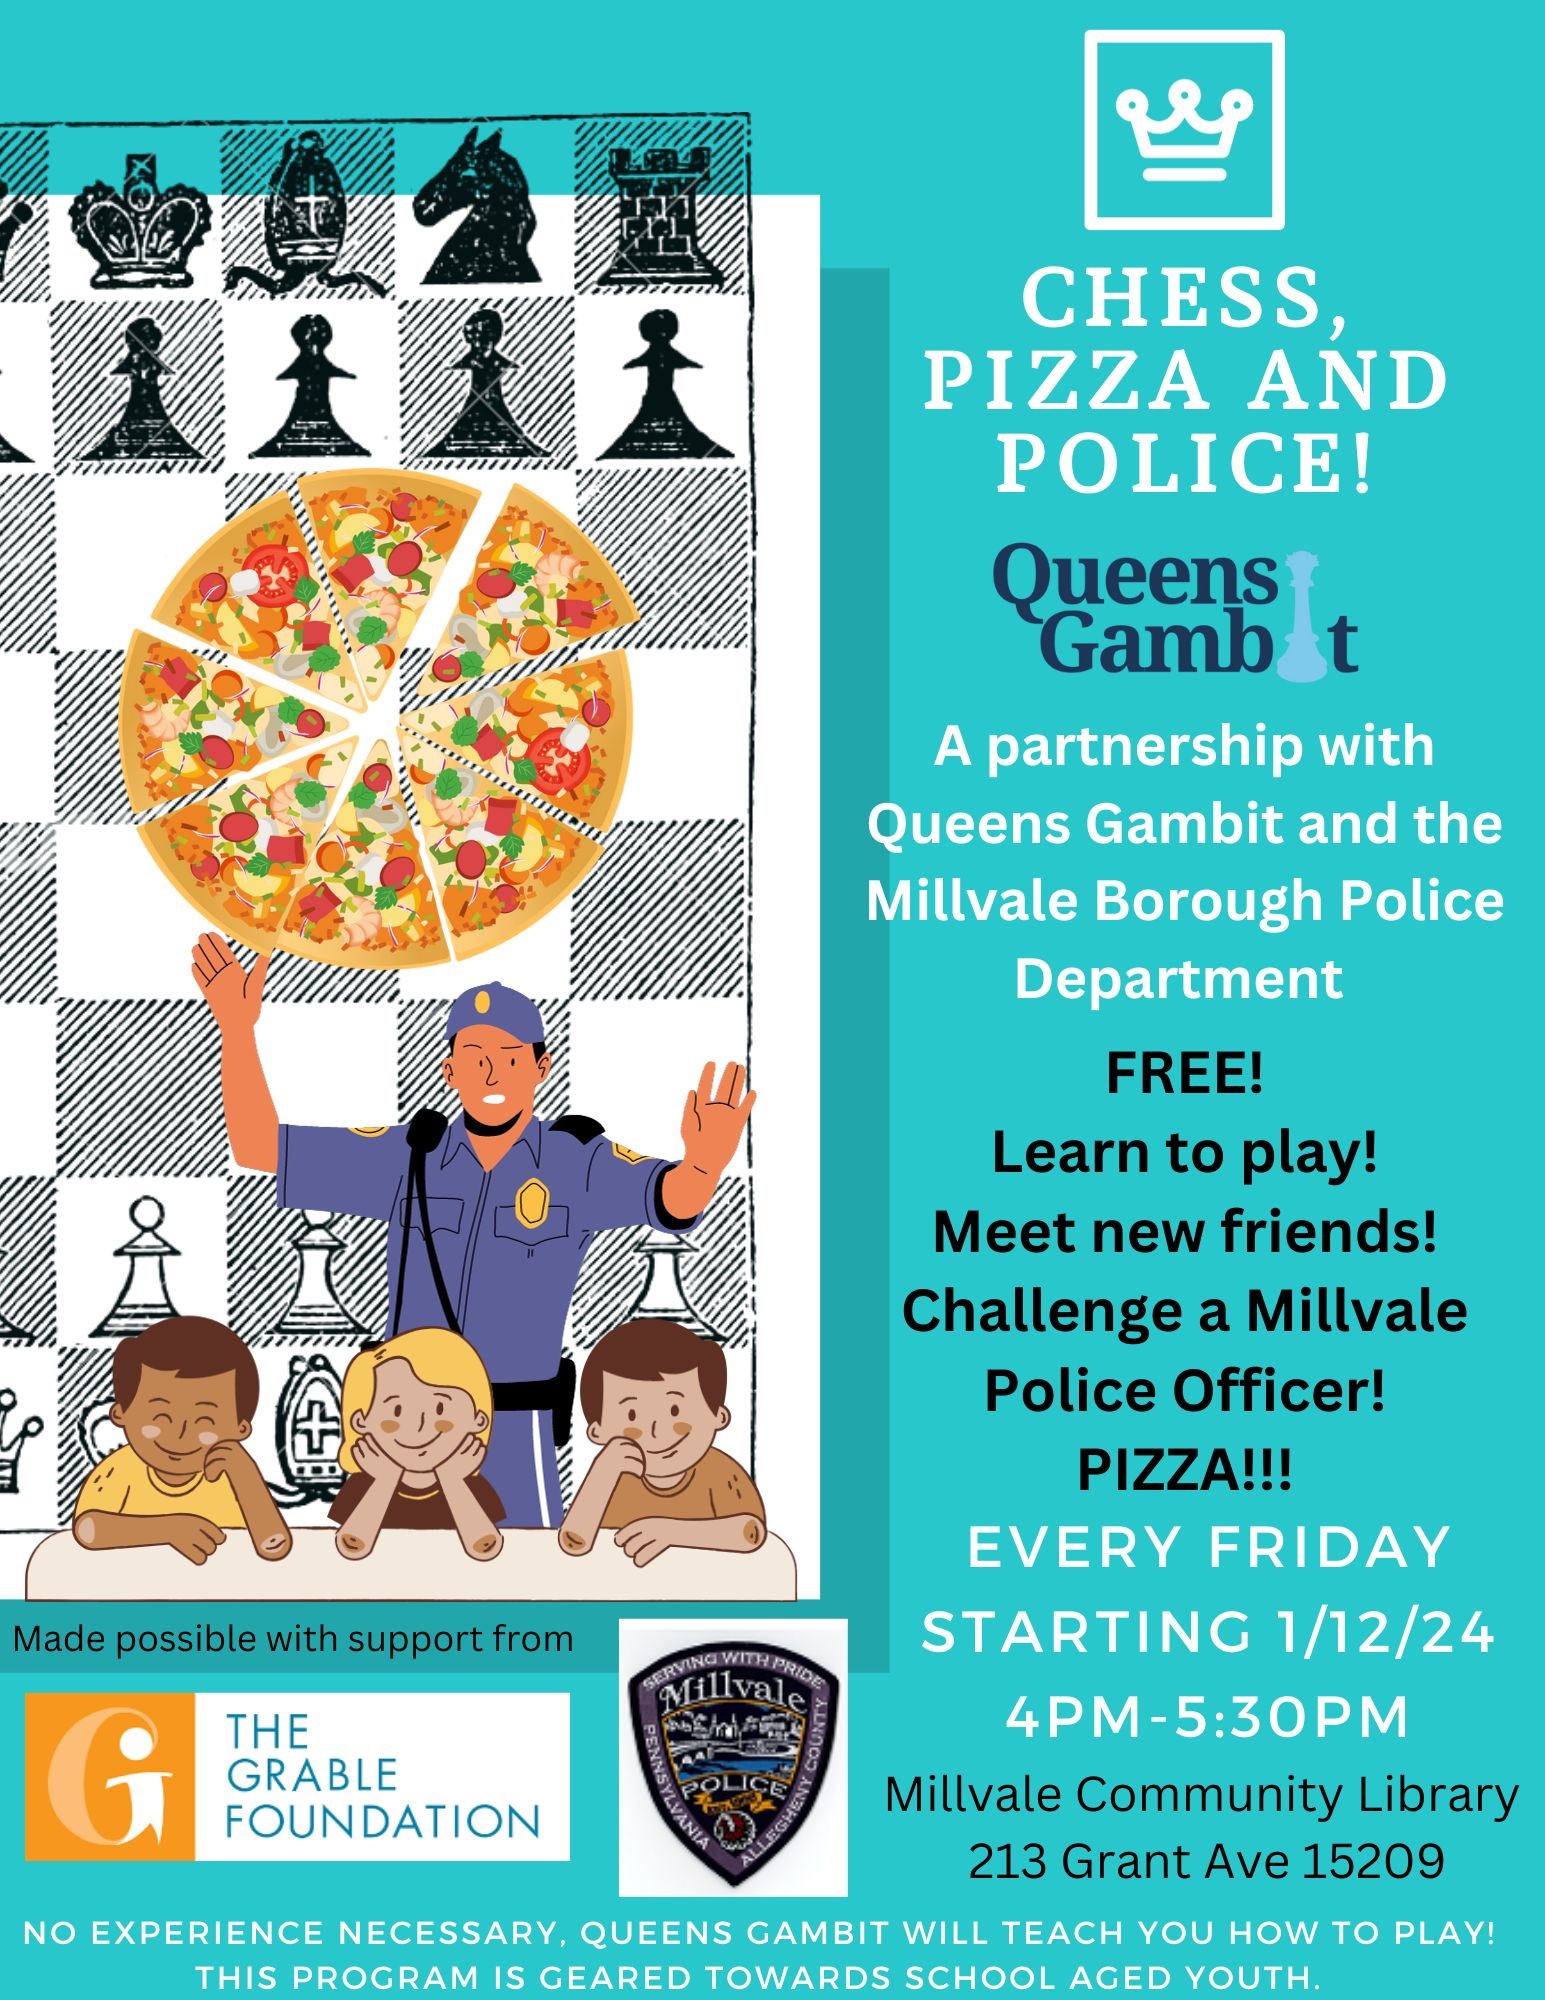 A colorful flyer for Chess, Pizza and Police, featuring a chess board, pizza, children and a police officer